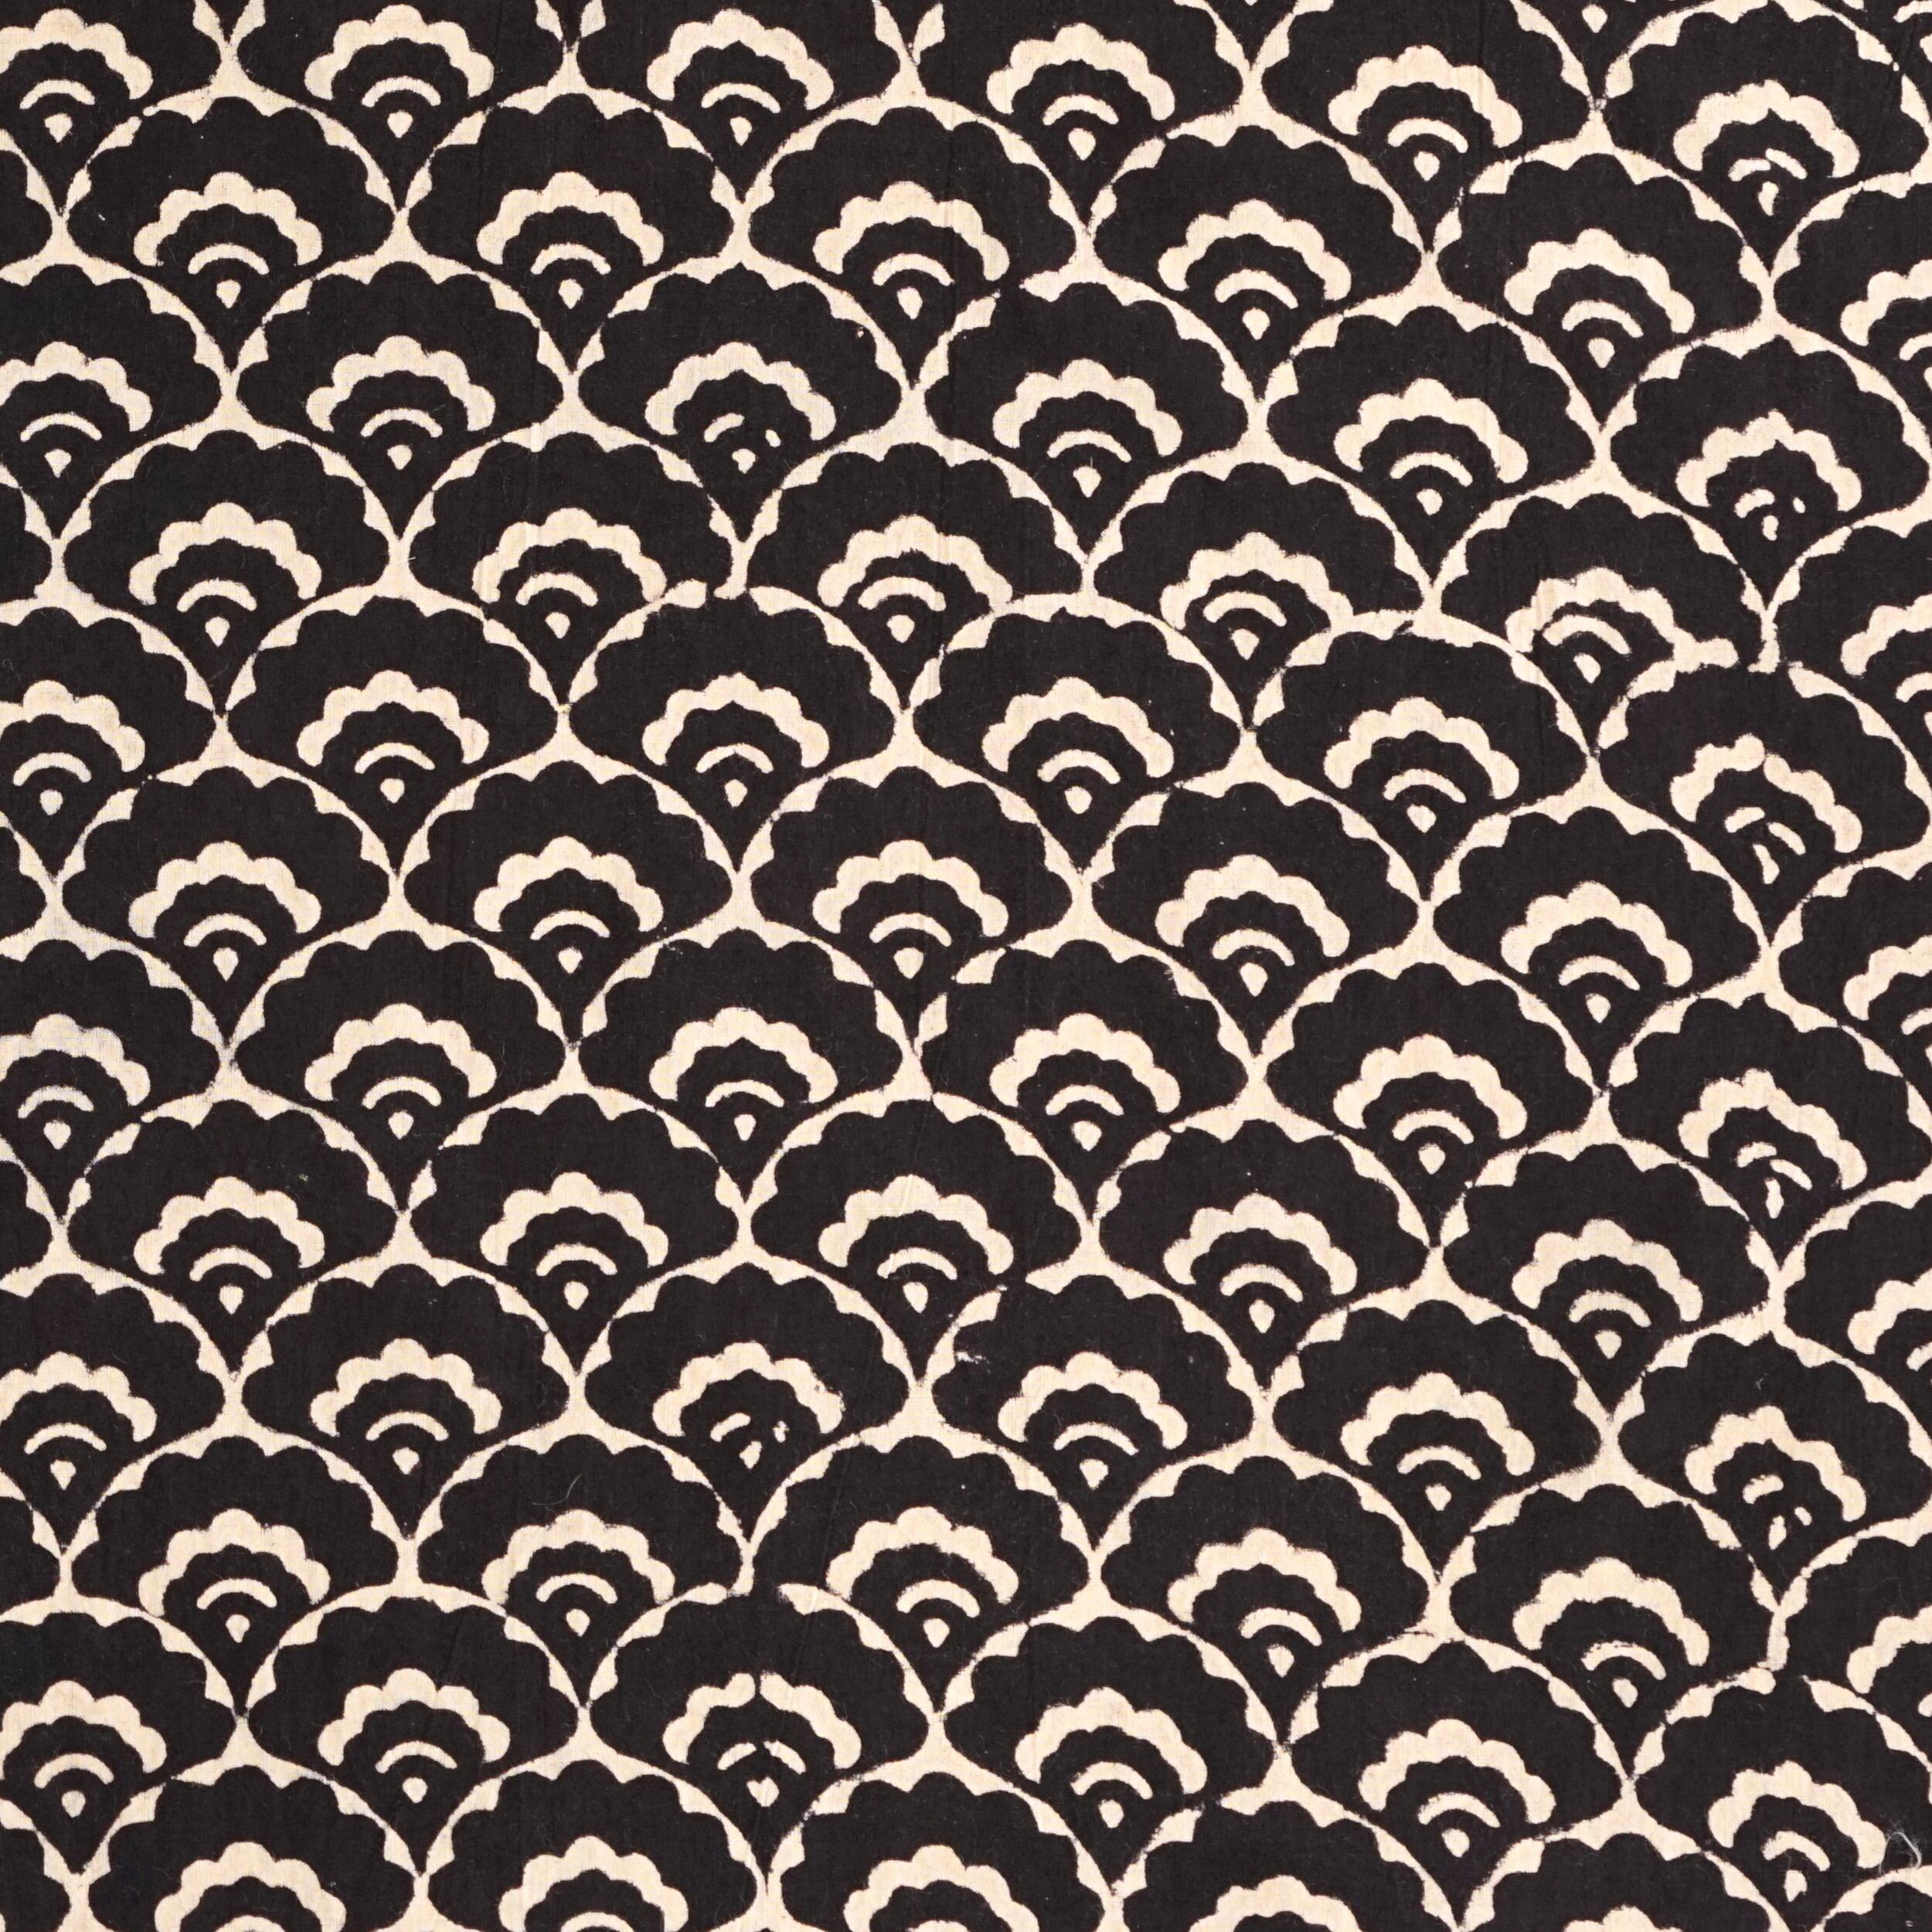 Indian Hand Woodblock-Printed Cotton - Clouds Print - Printed With Natural Black Iron Rust Dye - Flat